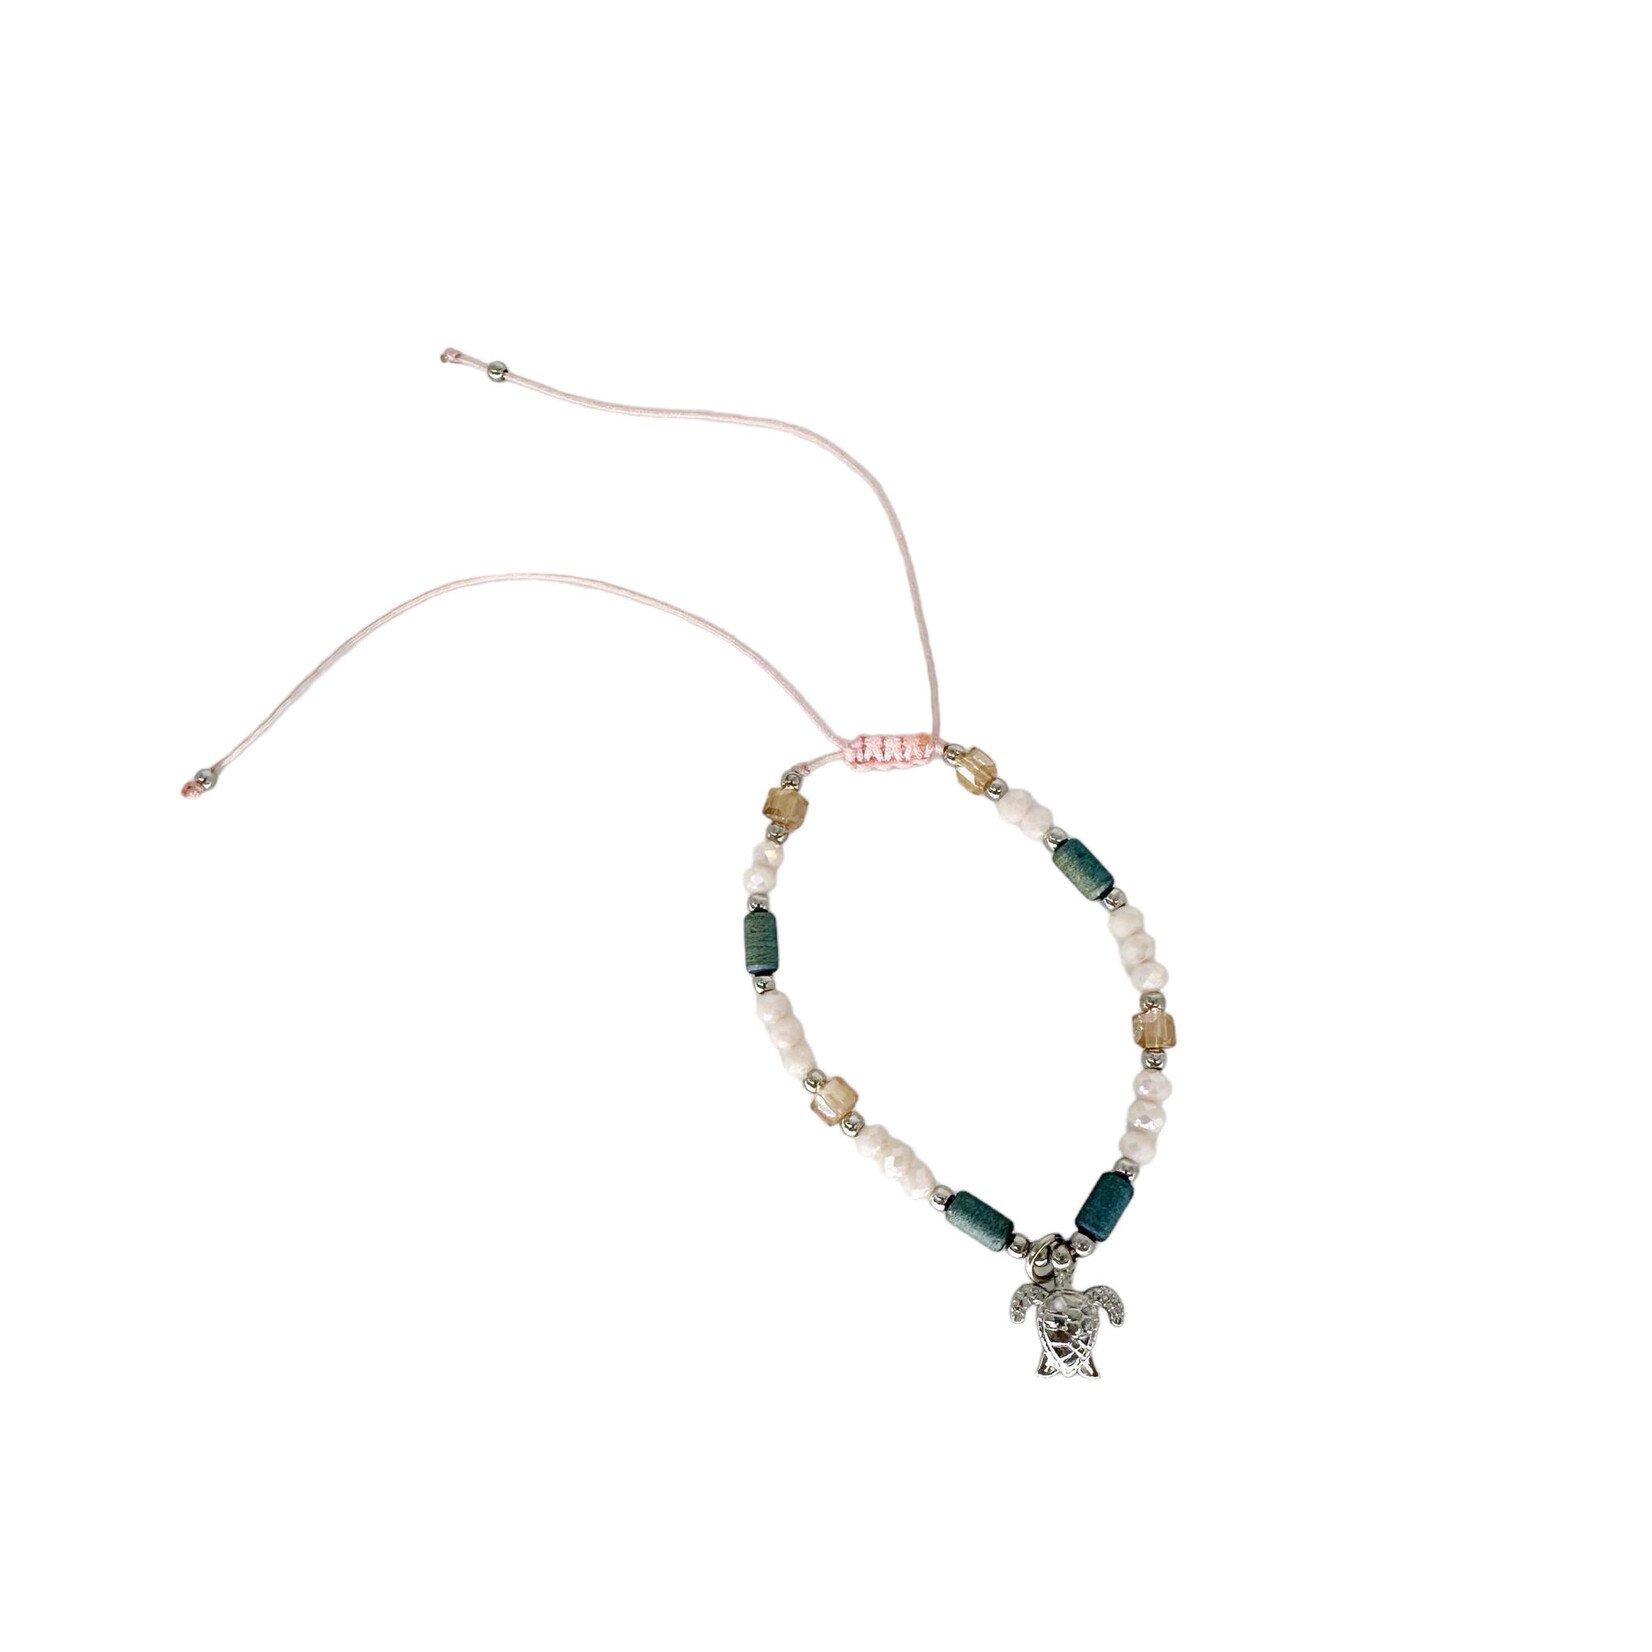 Adjustable Beaded Anklet with Charm Champagne Turtle